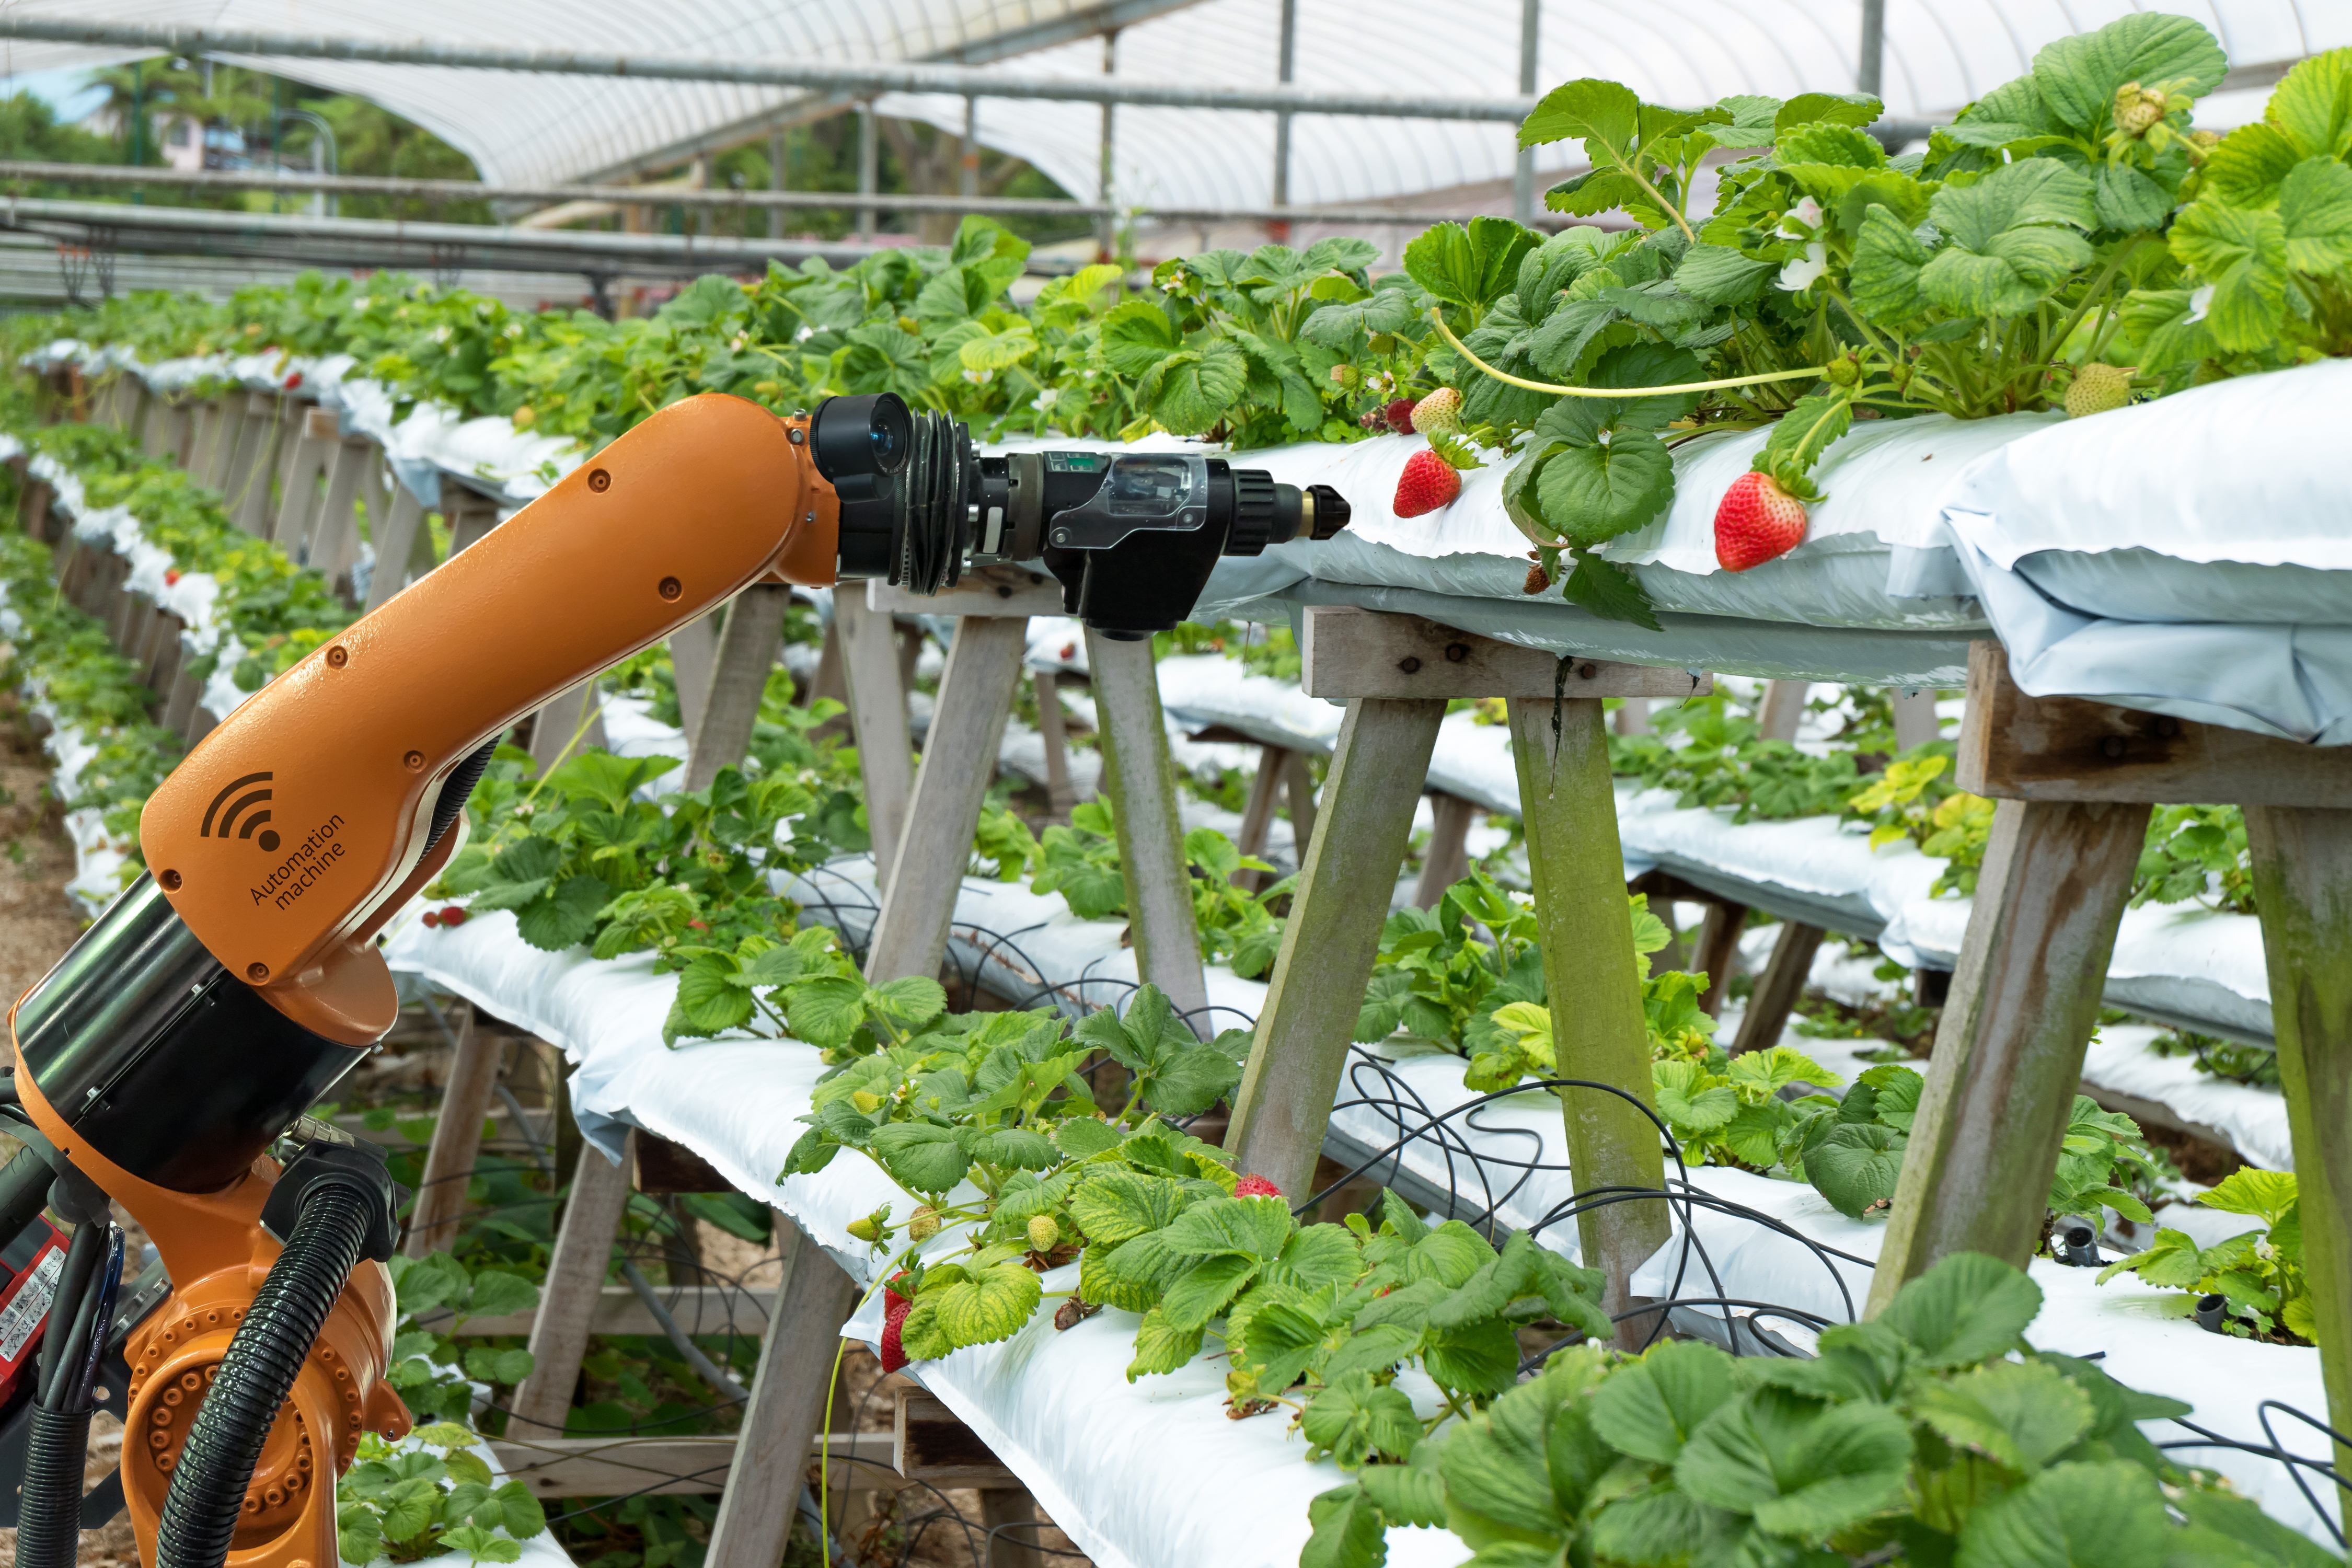 Robot viewing strawberry plants in greenhouse showing how mechatronics engineering is impacting agriculture